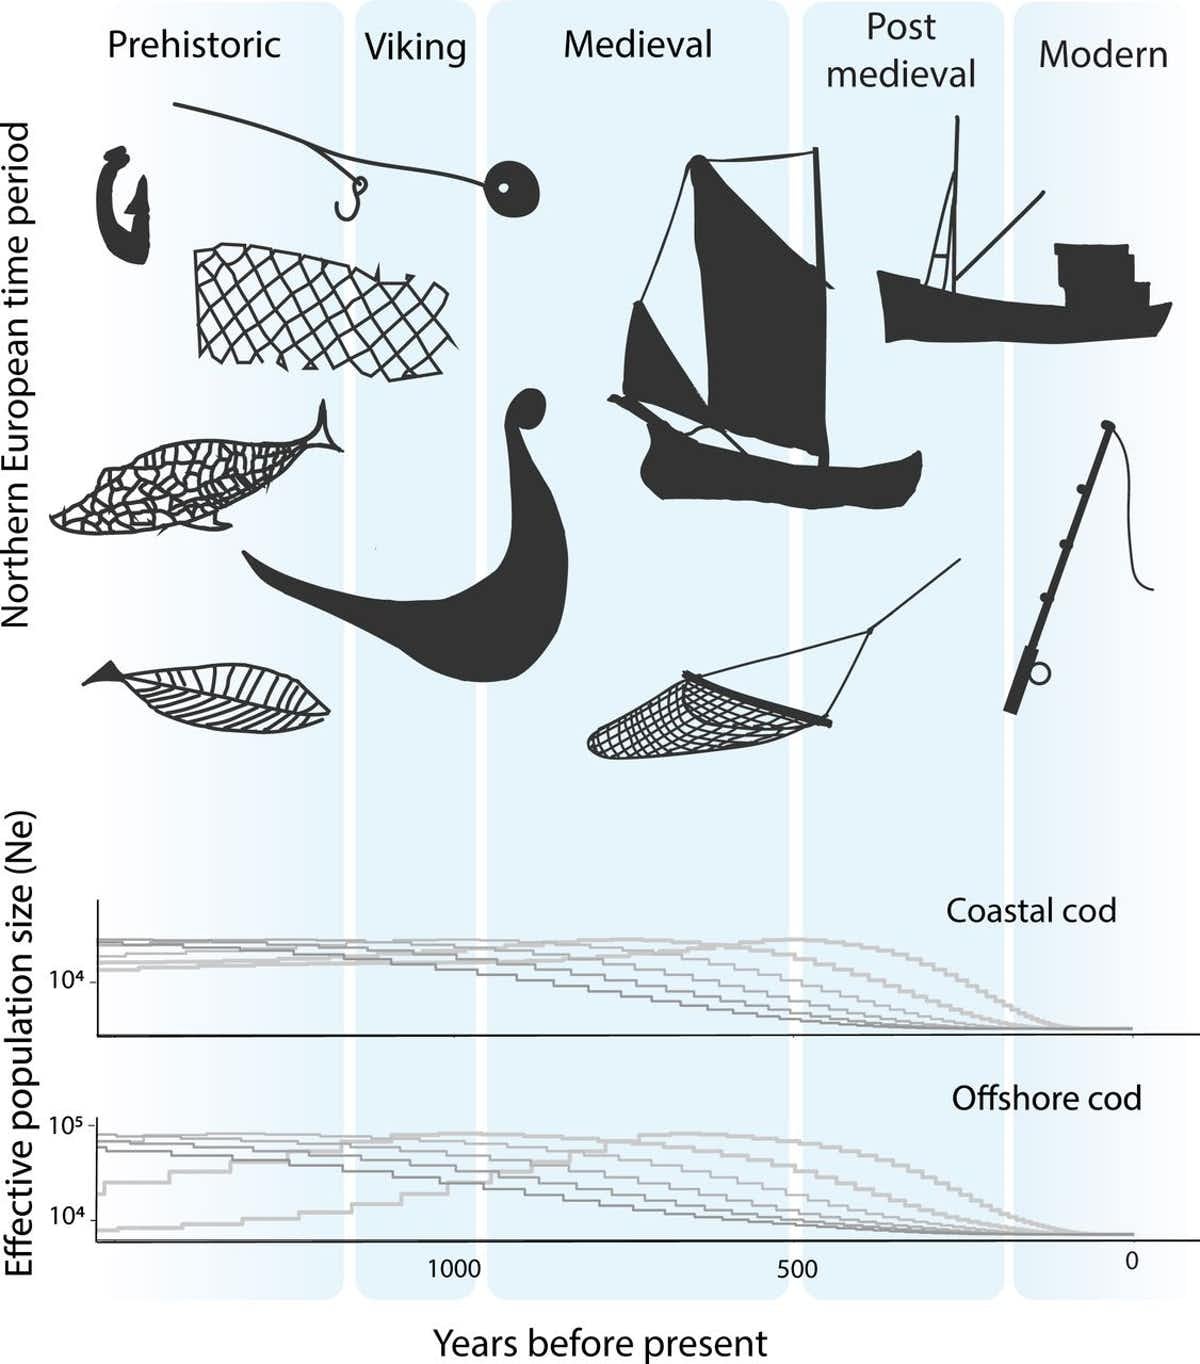 Cod in the north east Atlantic were in decline even before modern fishing.